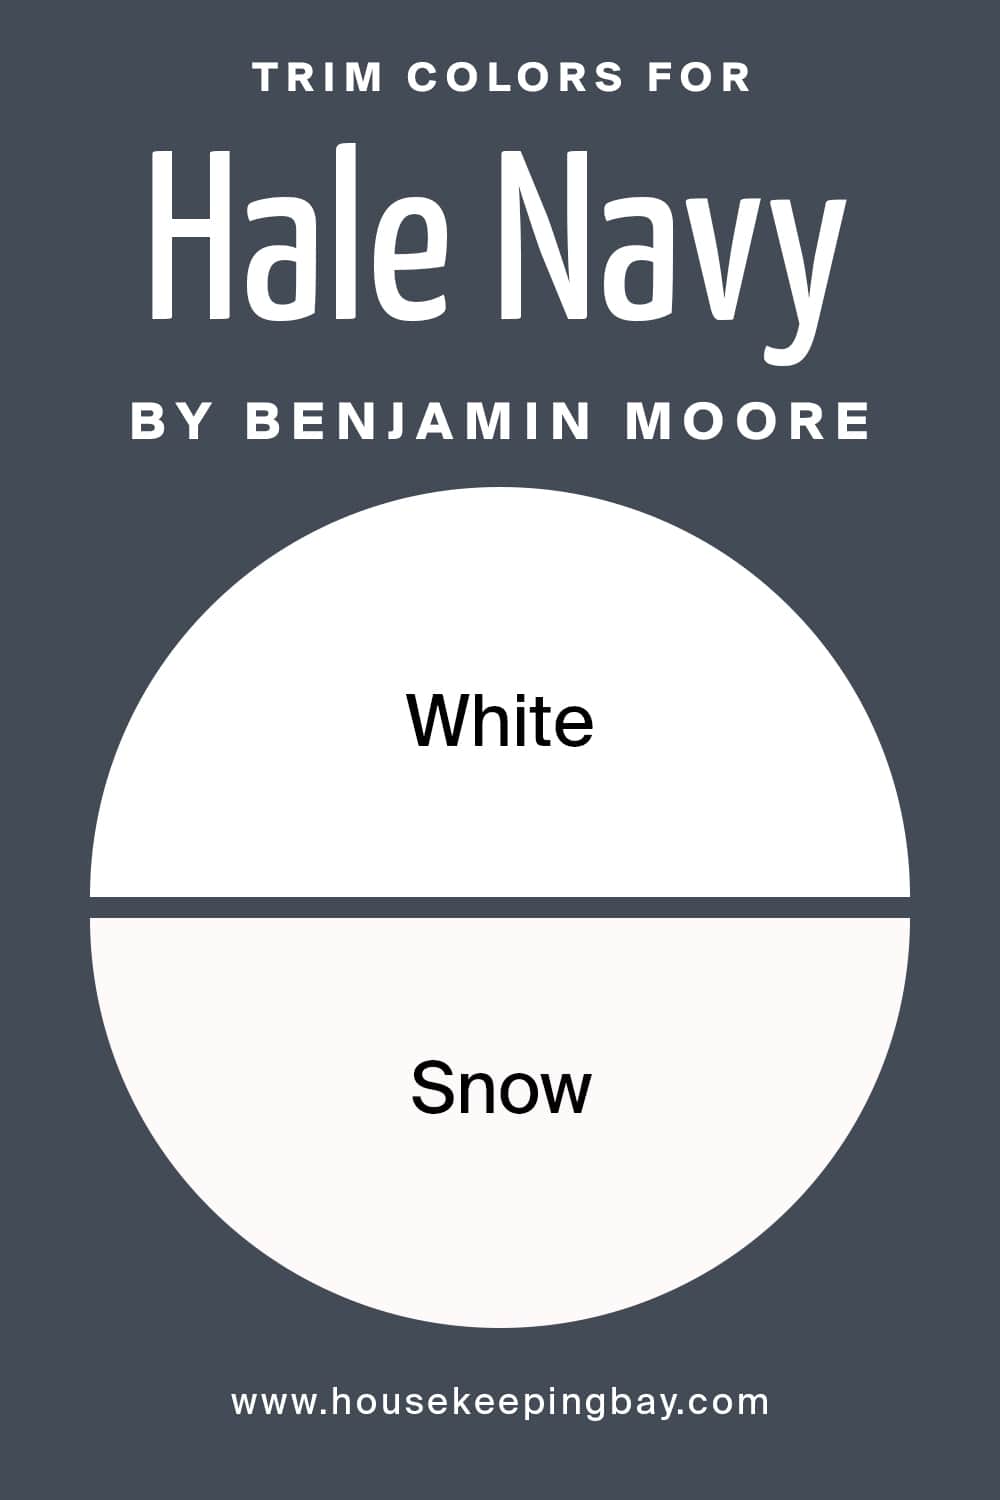 Trim Colors for Hale Navy by Benjamin Moore